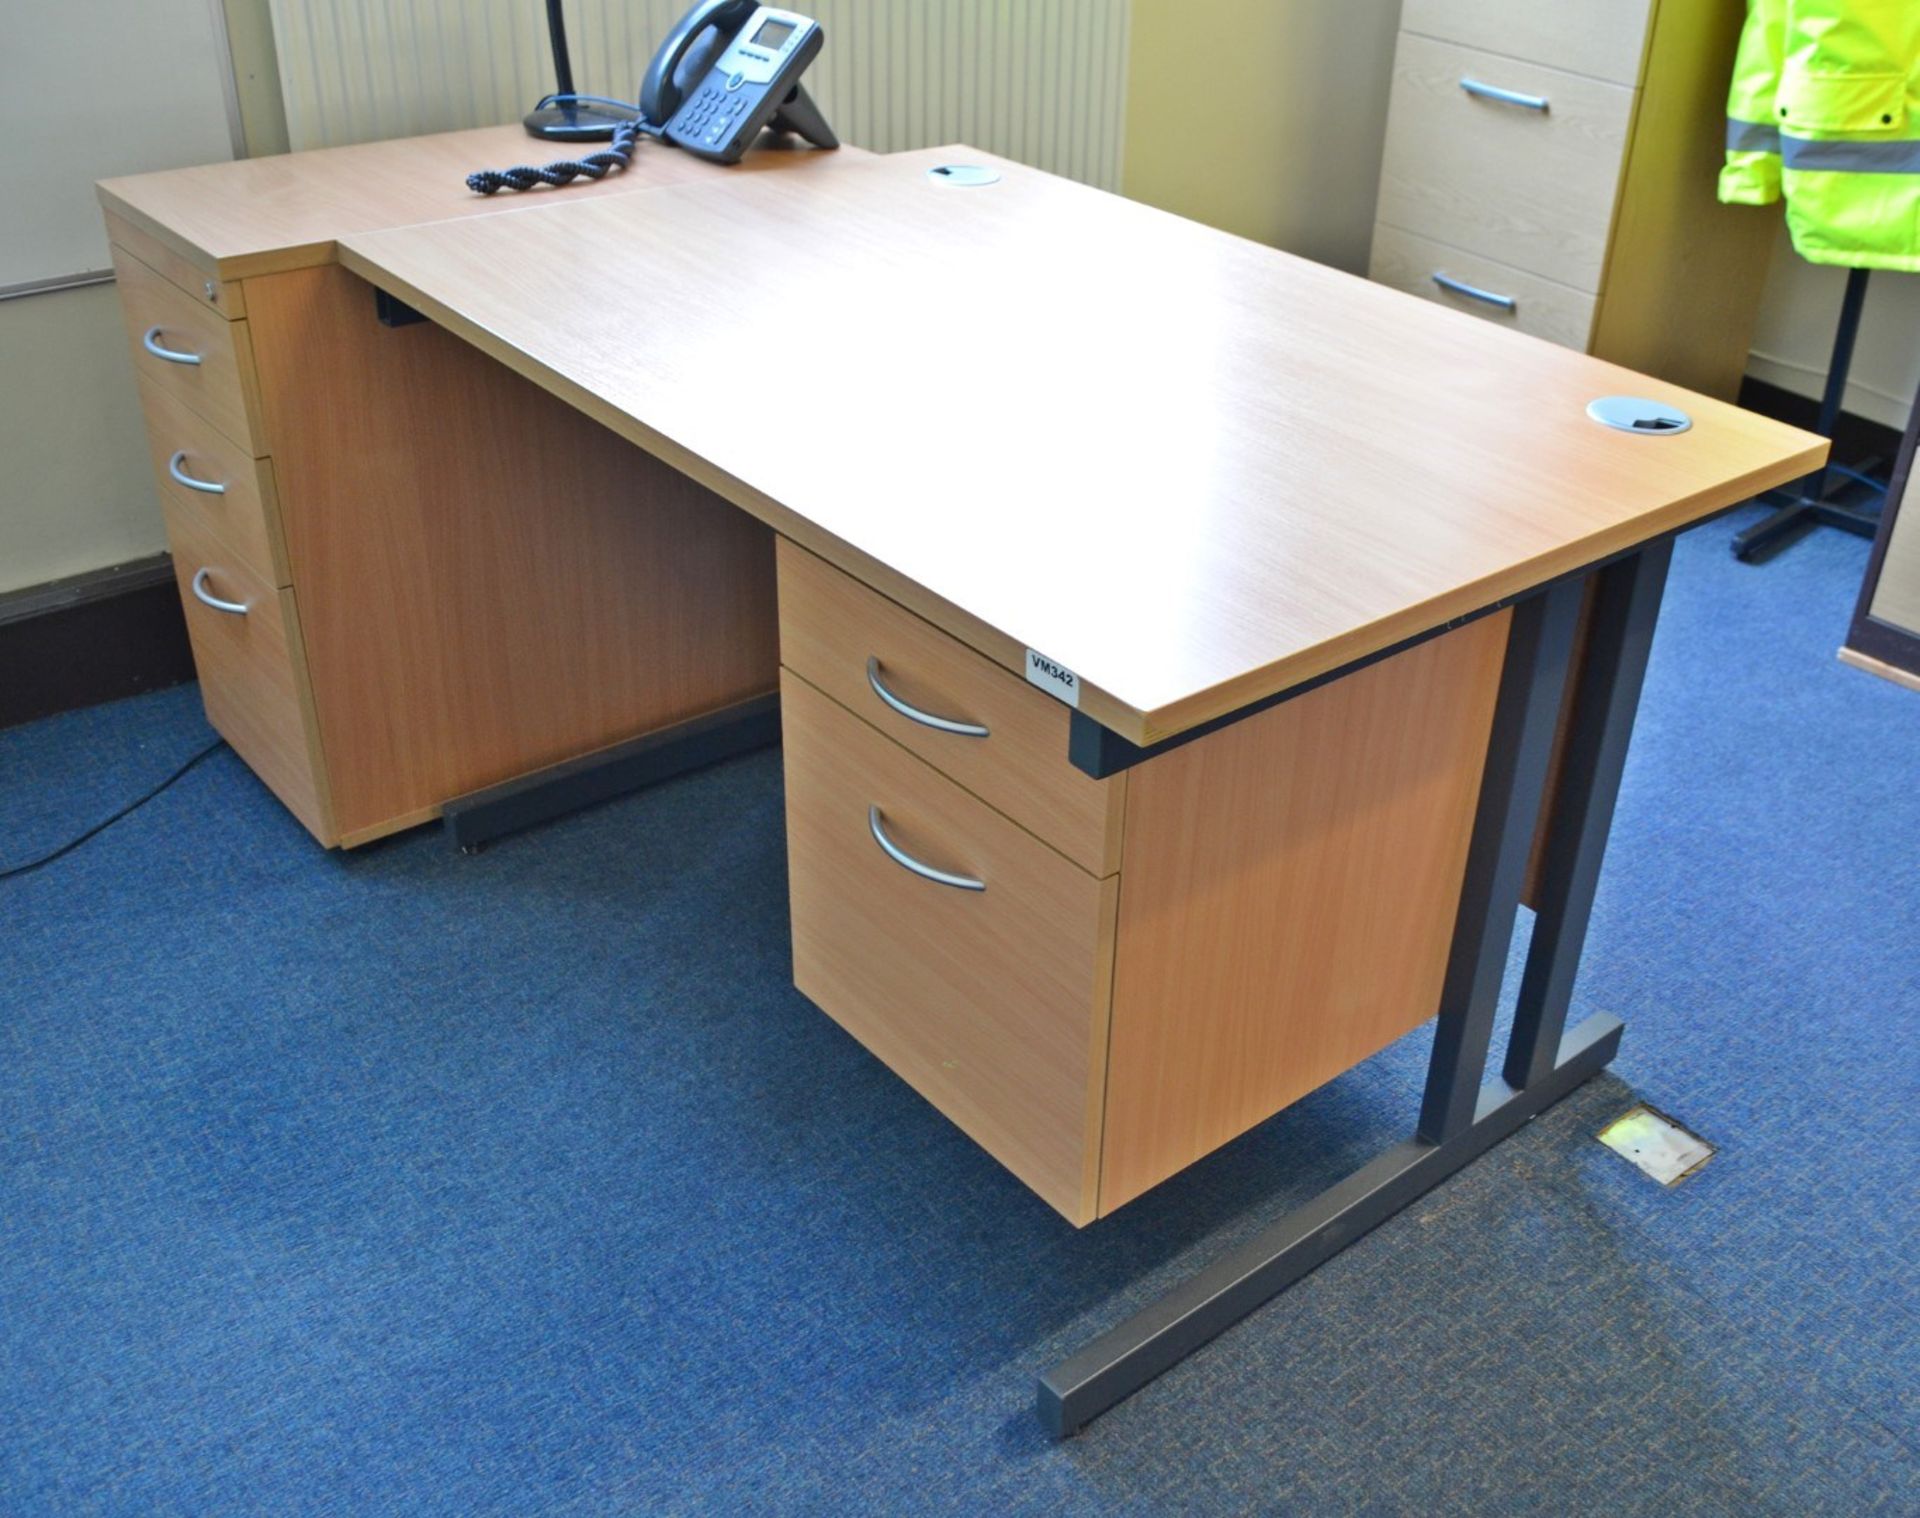 1 x Beech Office Desk Set With Drawer Pedestal, Chair and Storage Cabinet - Ref: VM342,VM346/A35 - Image 4 of 5